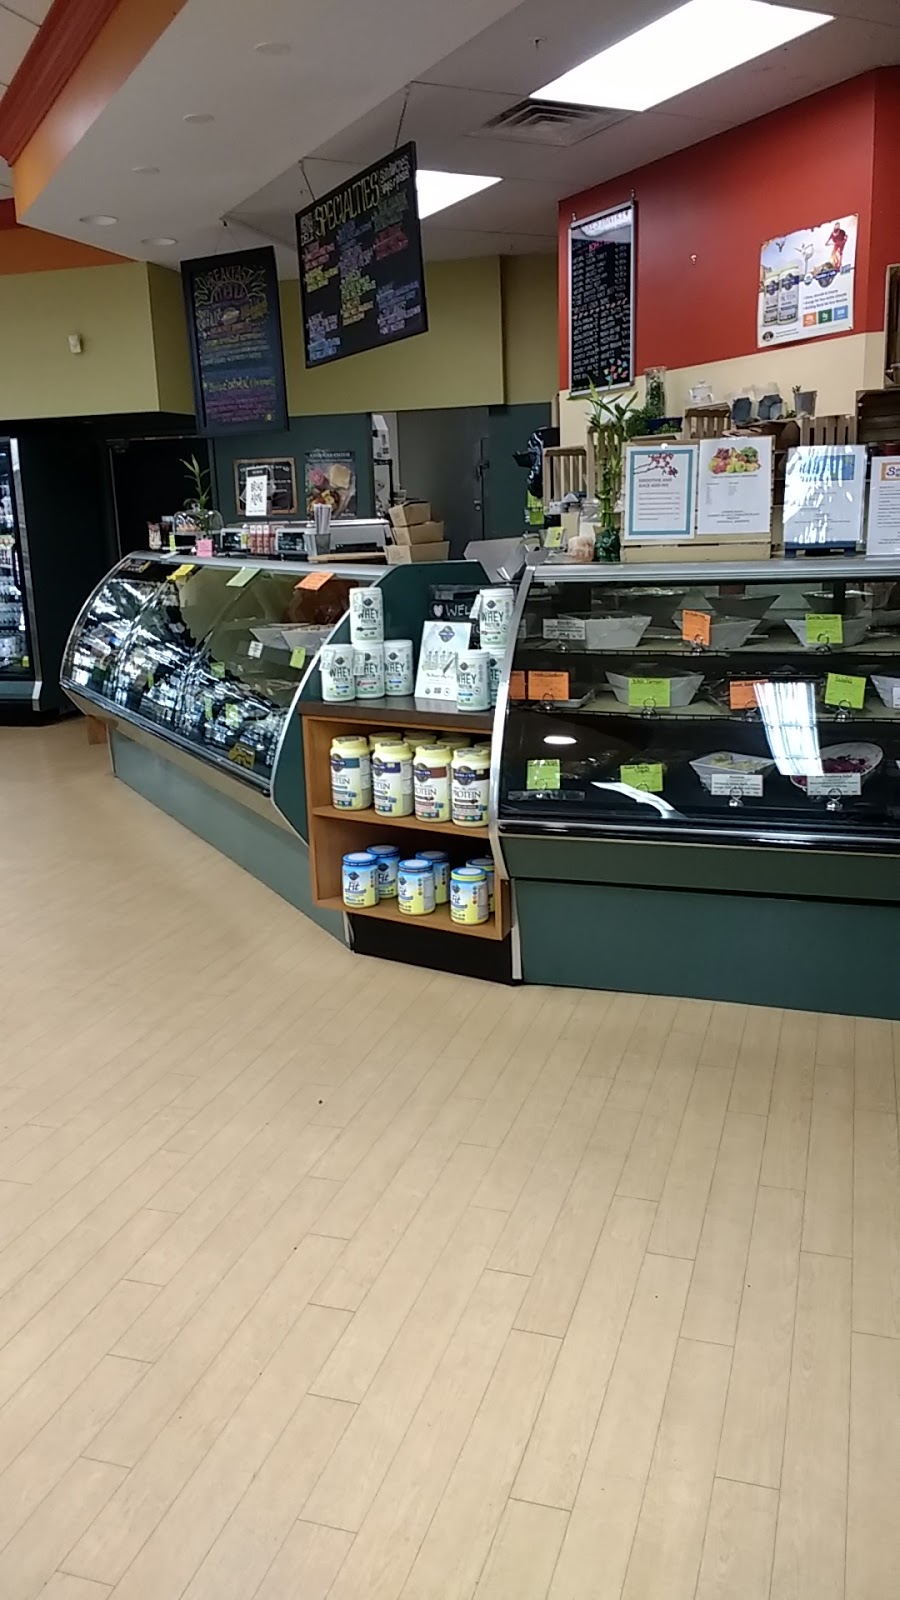 Natures Pantry | 436 Blooming Grove Turnpike, New Windsor, NY 12553 | Phone: (845) 565-4945